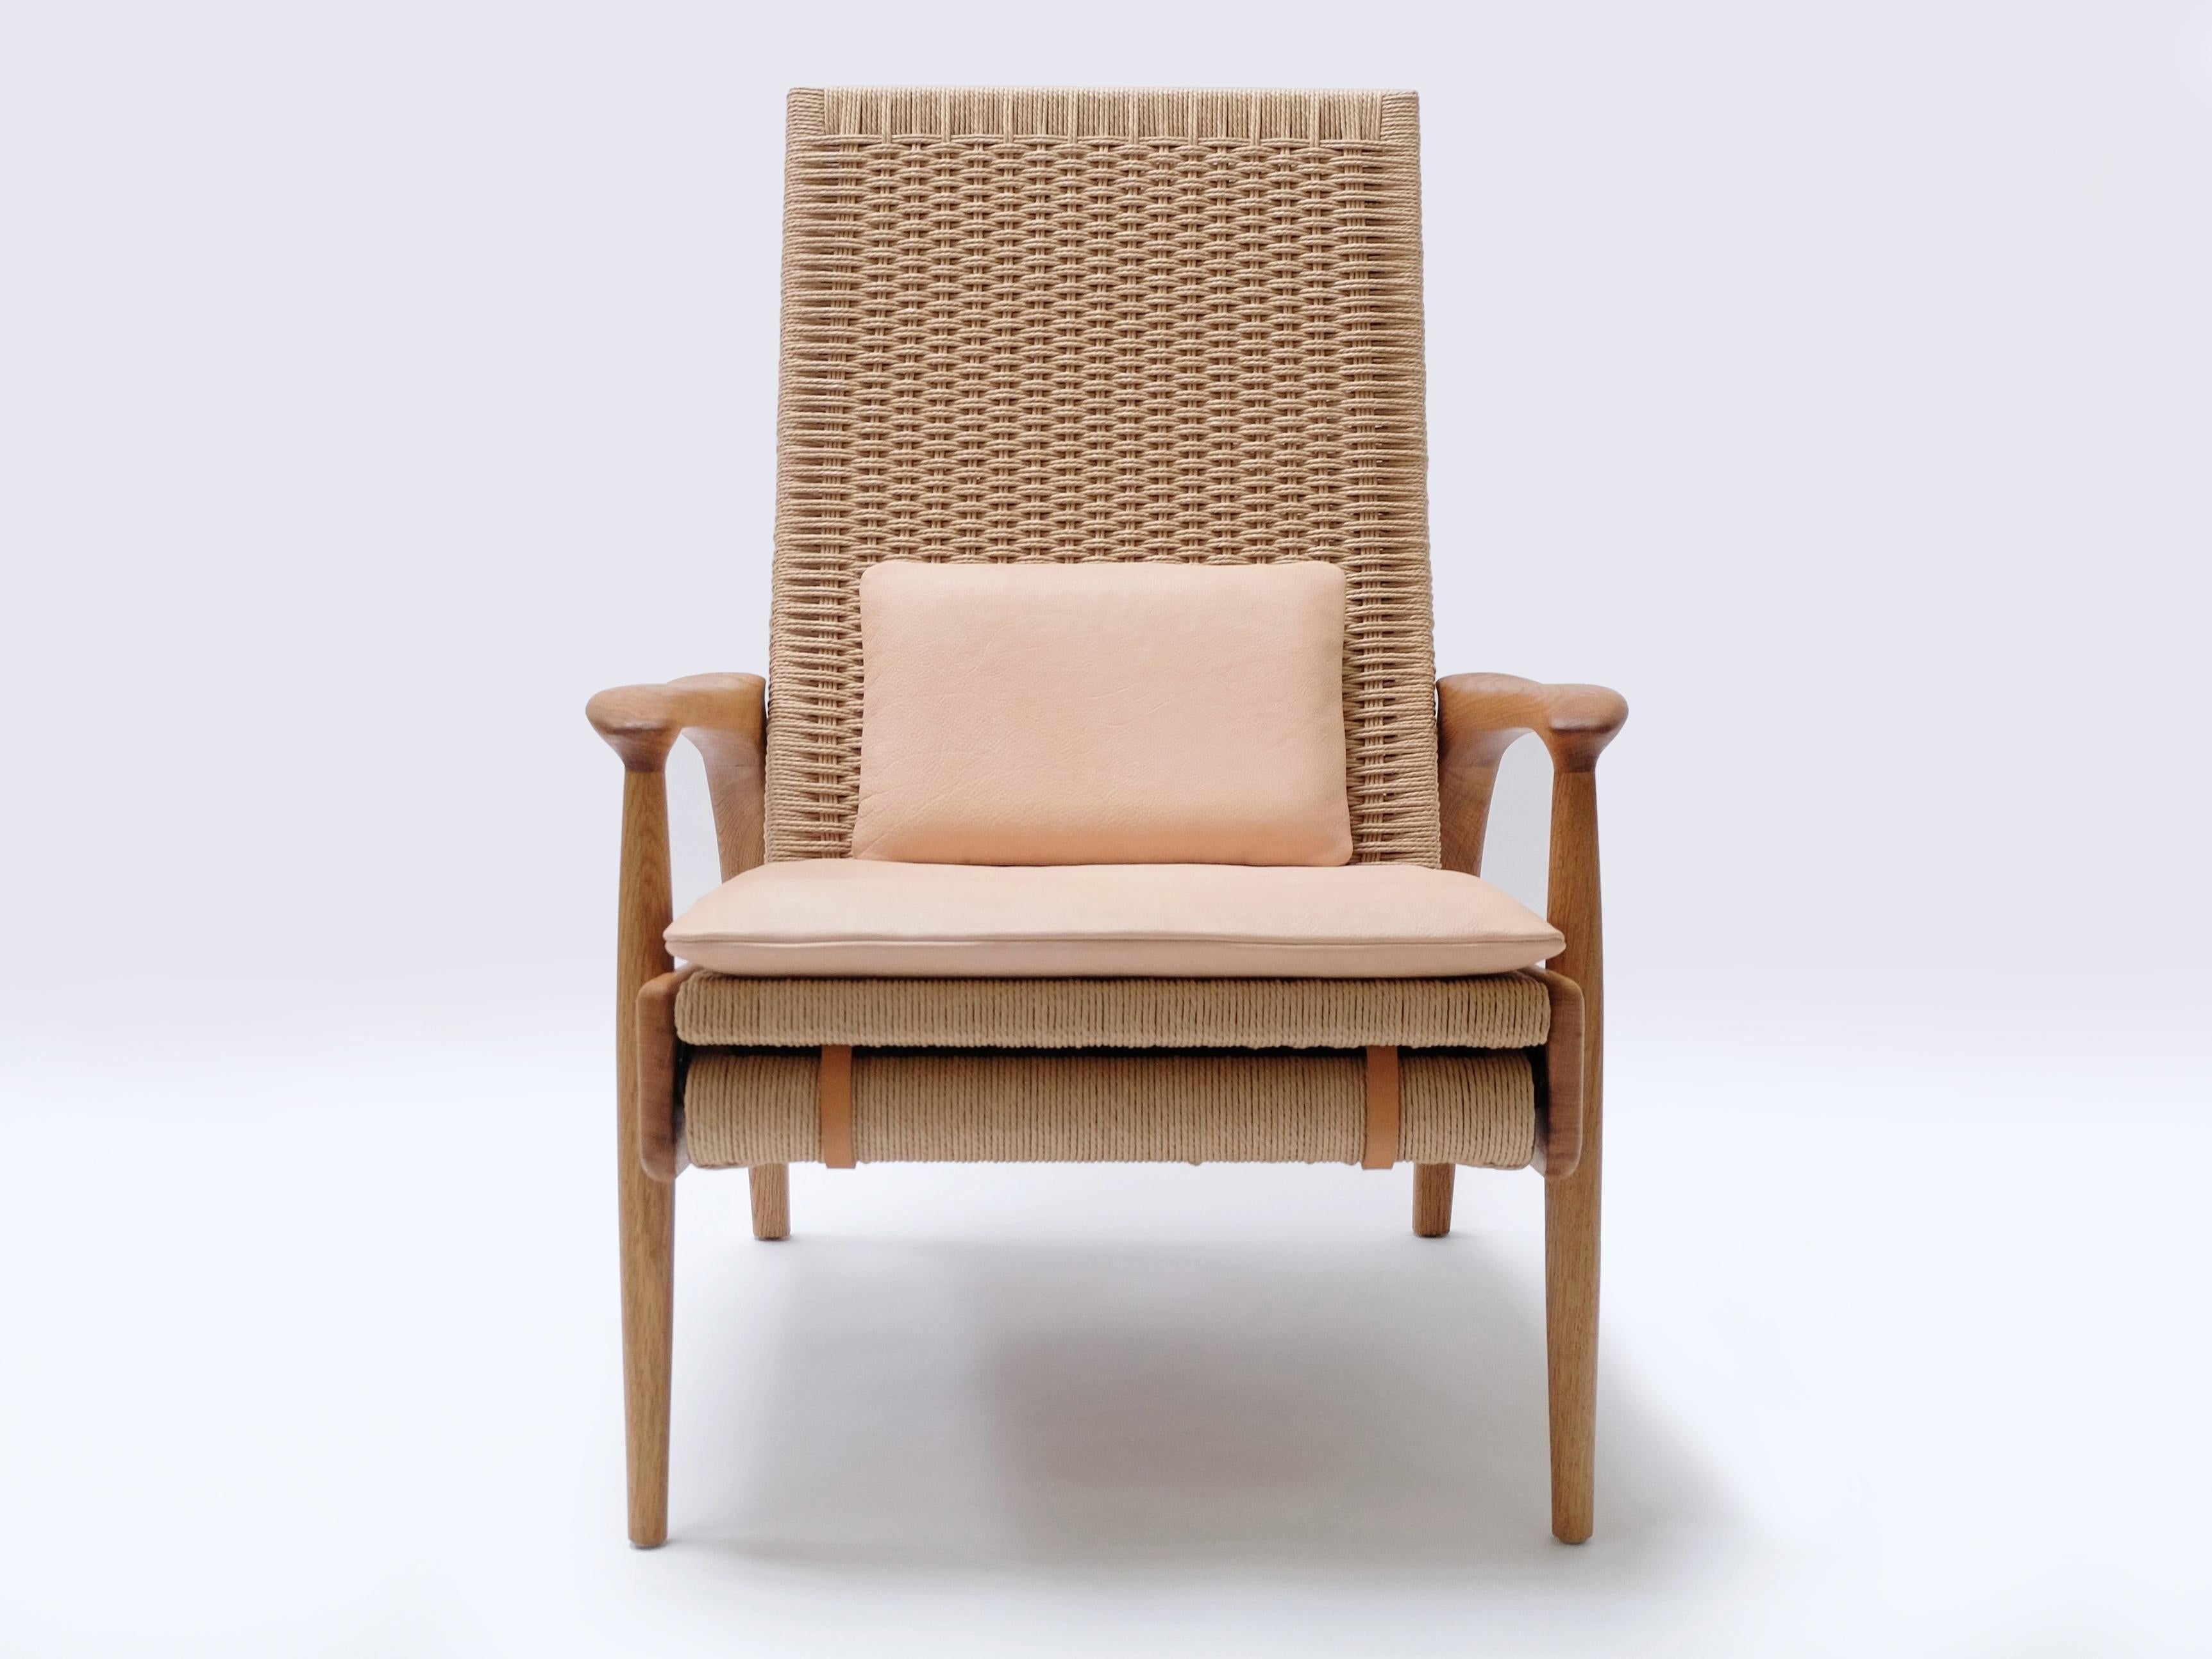 Pair of Custom-Made Handcrafted Reclining Eco Lounge Chairs FENDRIK by Studio180degree
Shown in Sustainable Solid Natural Oiled Oak and Original Natural Danish Cord 

Noble - Tactile – Refined - Sustainable
Reclining Eco Lounge Chair FENDRIK is a